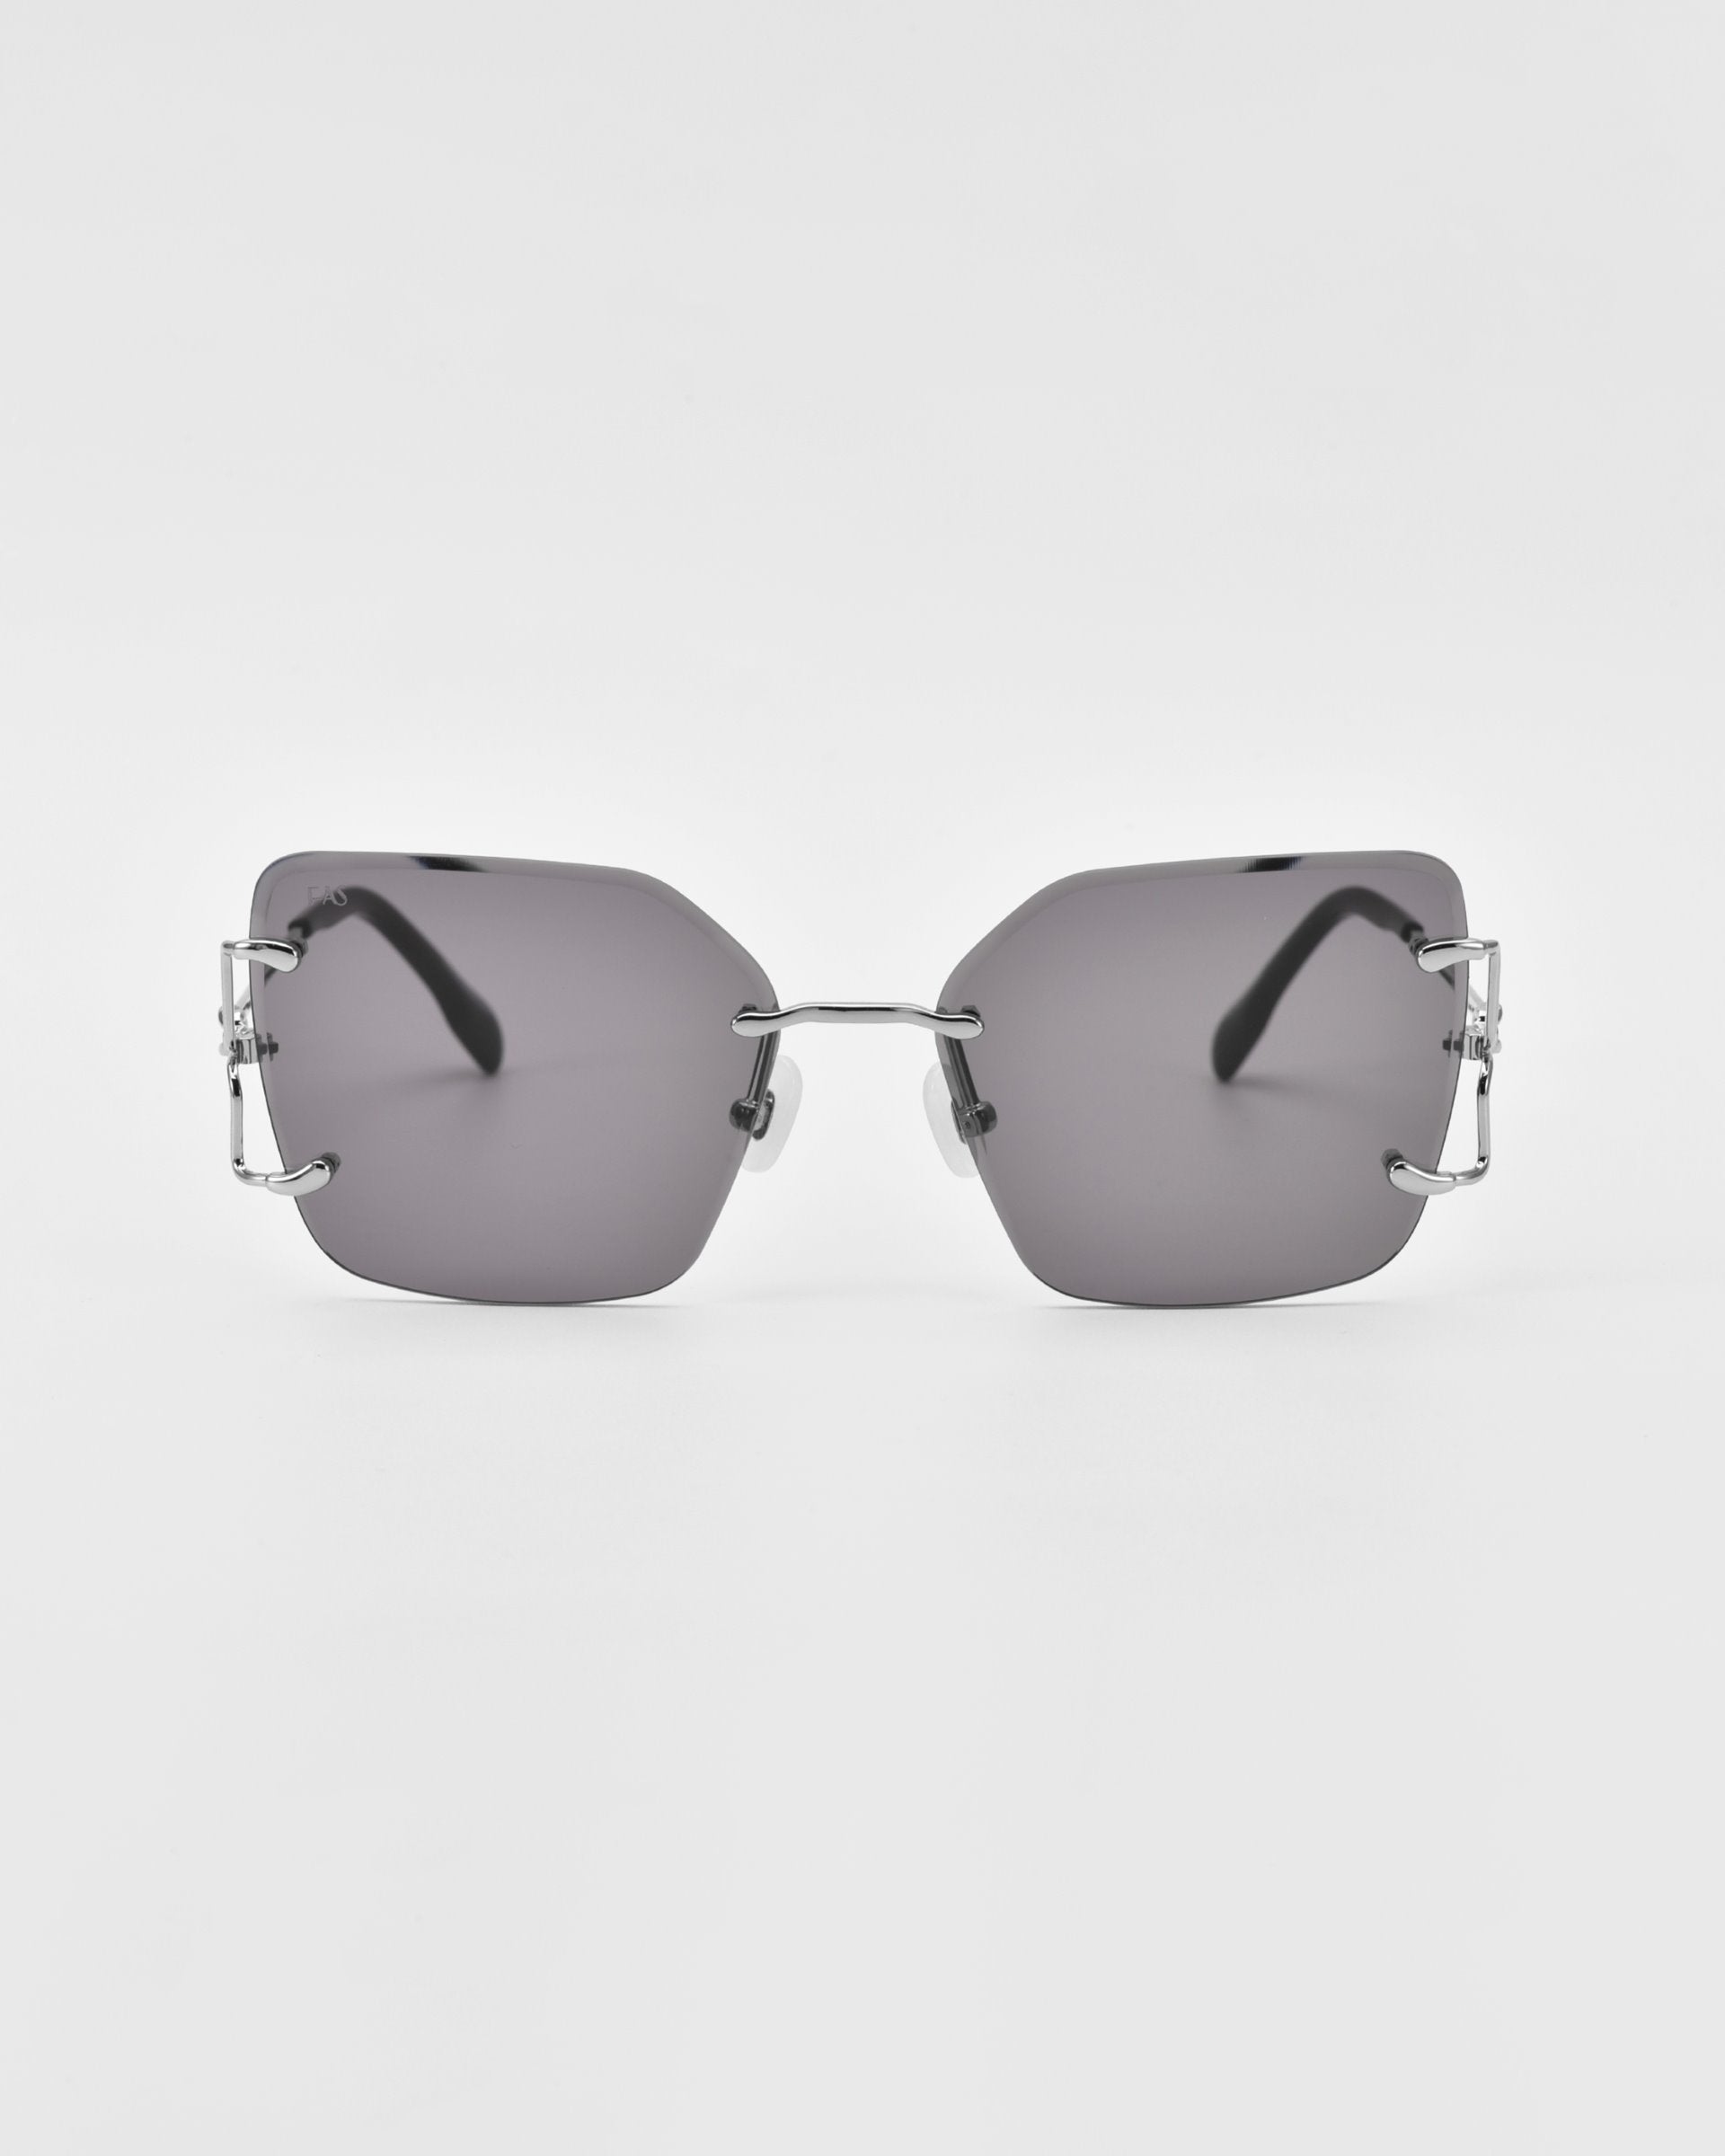 A pair of sleek, rectangular, rimless For Art&#39;s Sake® Starlit sunglasses with dark lenses and metallic bridge and temples. The minimalist design features thin, metallic ear rests, jade-stone nosepads, and exposed screw details at the lens corners on a plain white background.